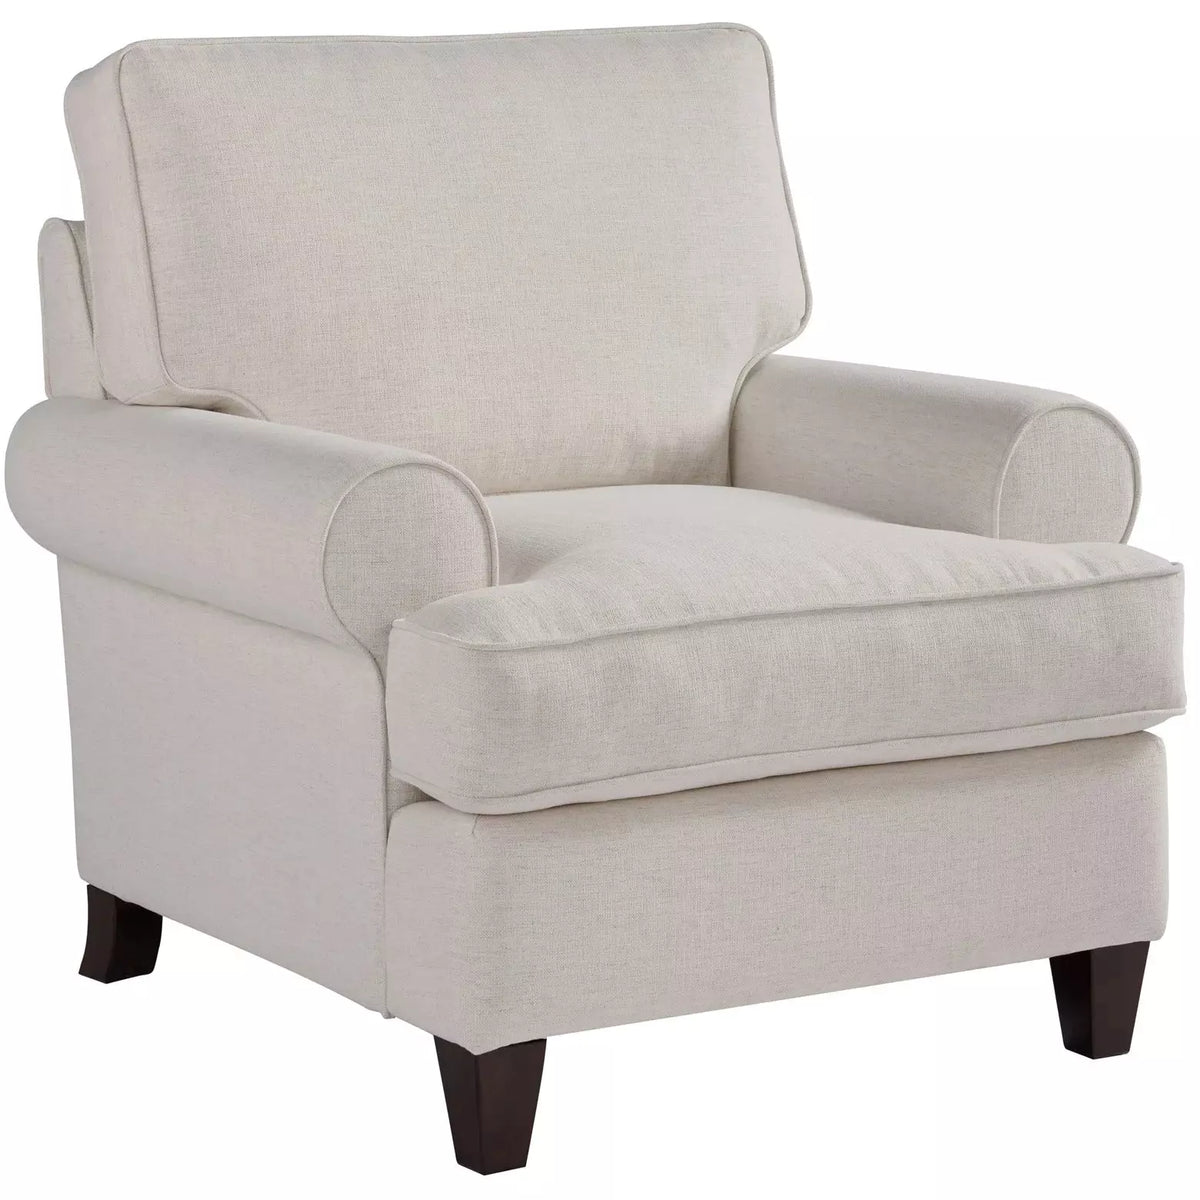 Blakely Chair Off White - Be Bold Furniture